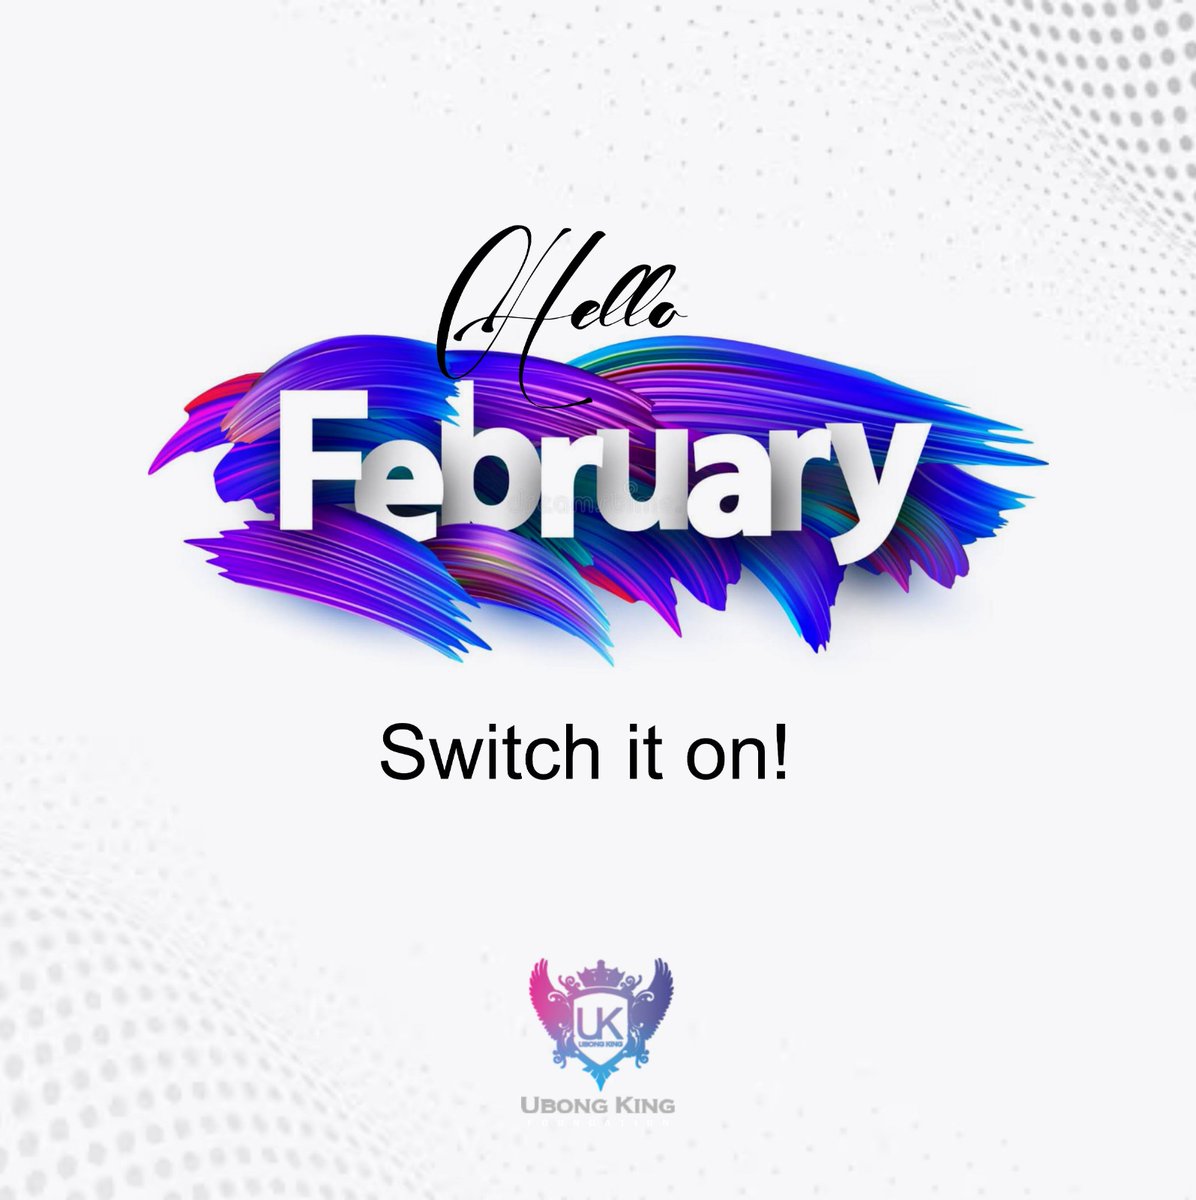 Switch It on and Enjoy your month of February to the fullest, with your goals and dreams being fulfilled. 

Happy New Month.

From All Of Us at Ubong King Foundation!

#UbongKingLivesOn
#UbongKingLegacies
#Thinkation2023
#TheWinningEdge 
#Thinkation2024
#SwitchItOn